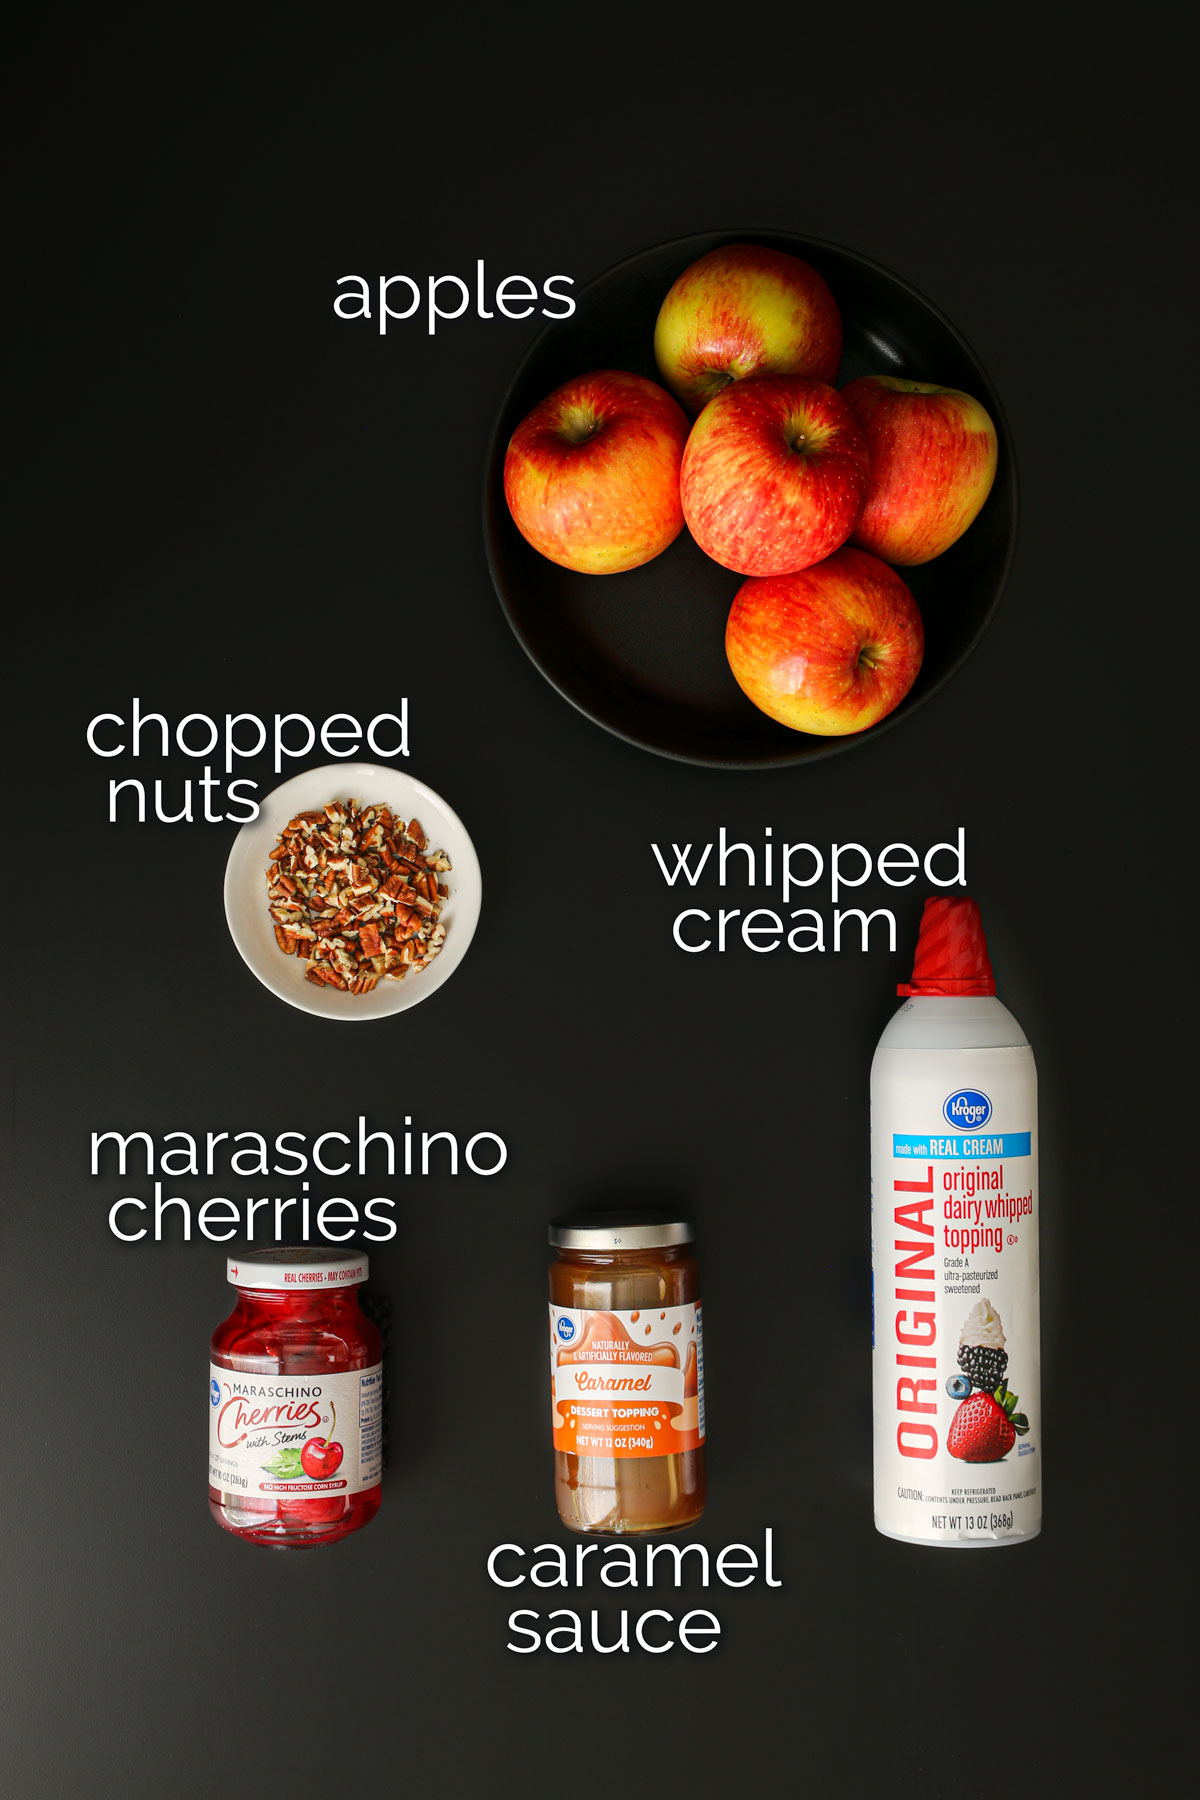 ingredients for apple slices with caramel laid out on black table top.